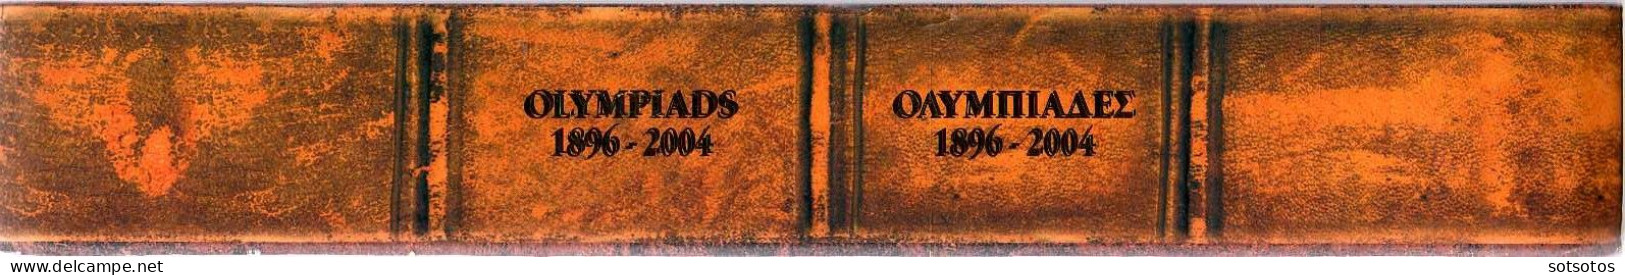 Athens Olympiads 1896-2004 - Libros